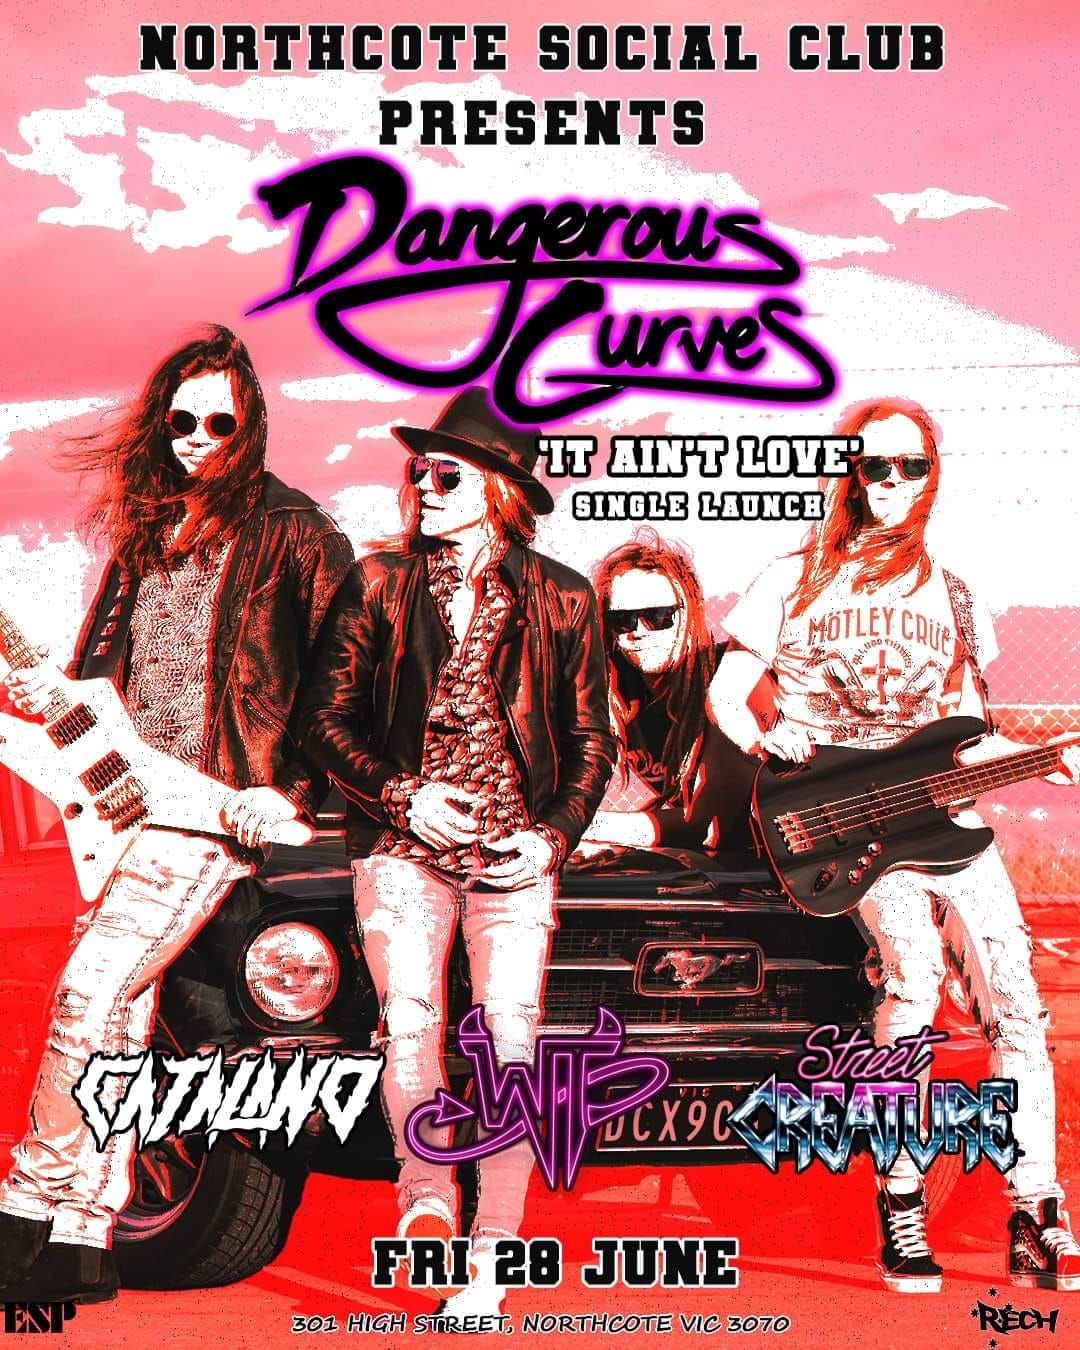 DANGEROUS CURVES - 'IT AIN'T LOVE' SINGLE LAUNCH - with CATALANO, WICKED THINGS & STREET CREATURE 